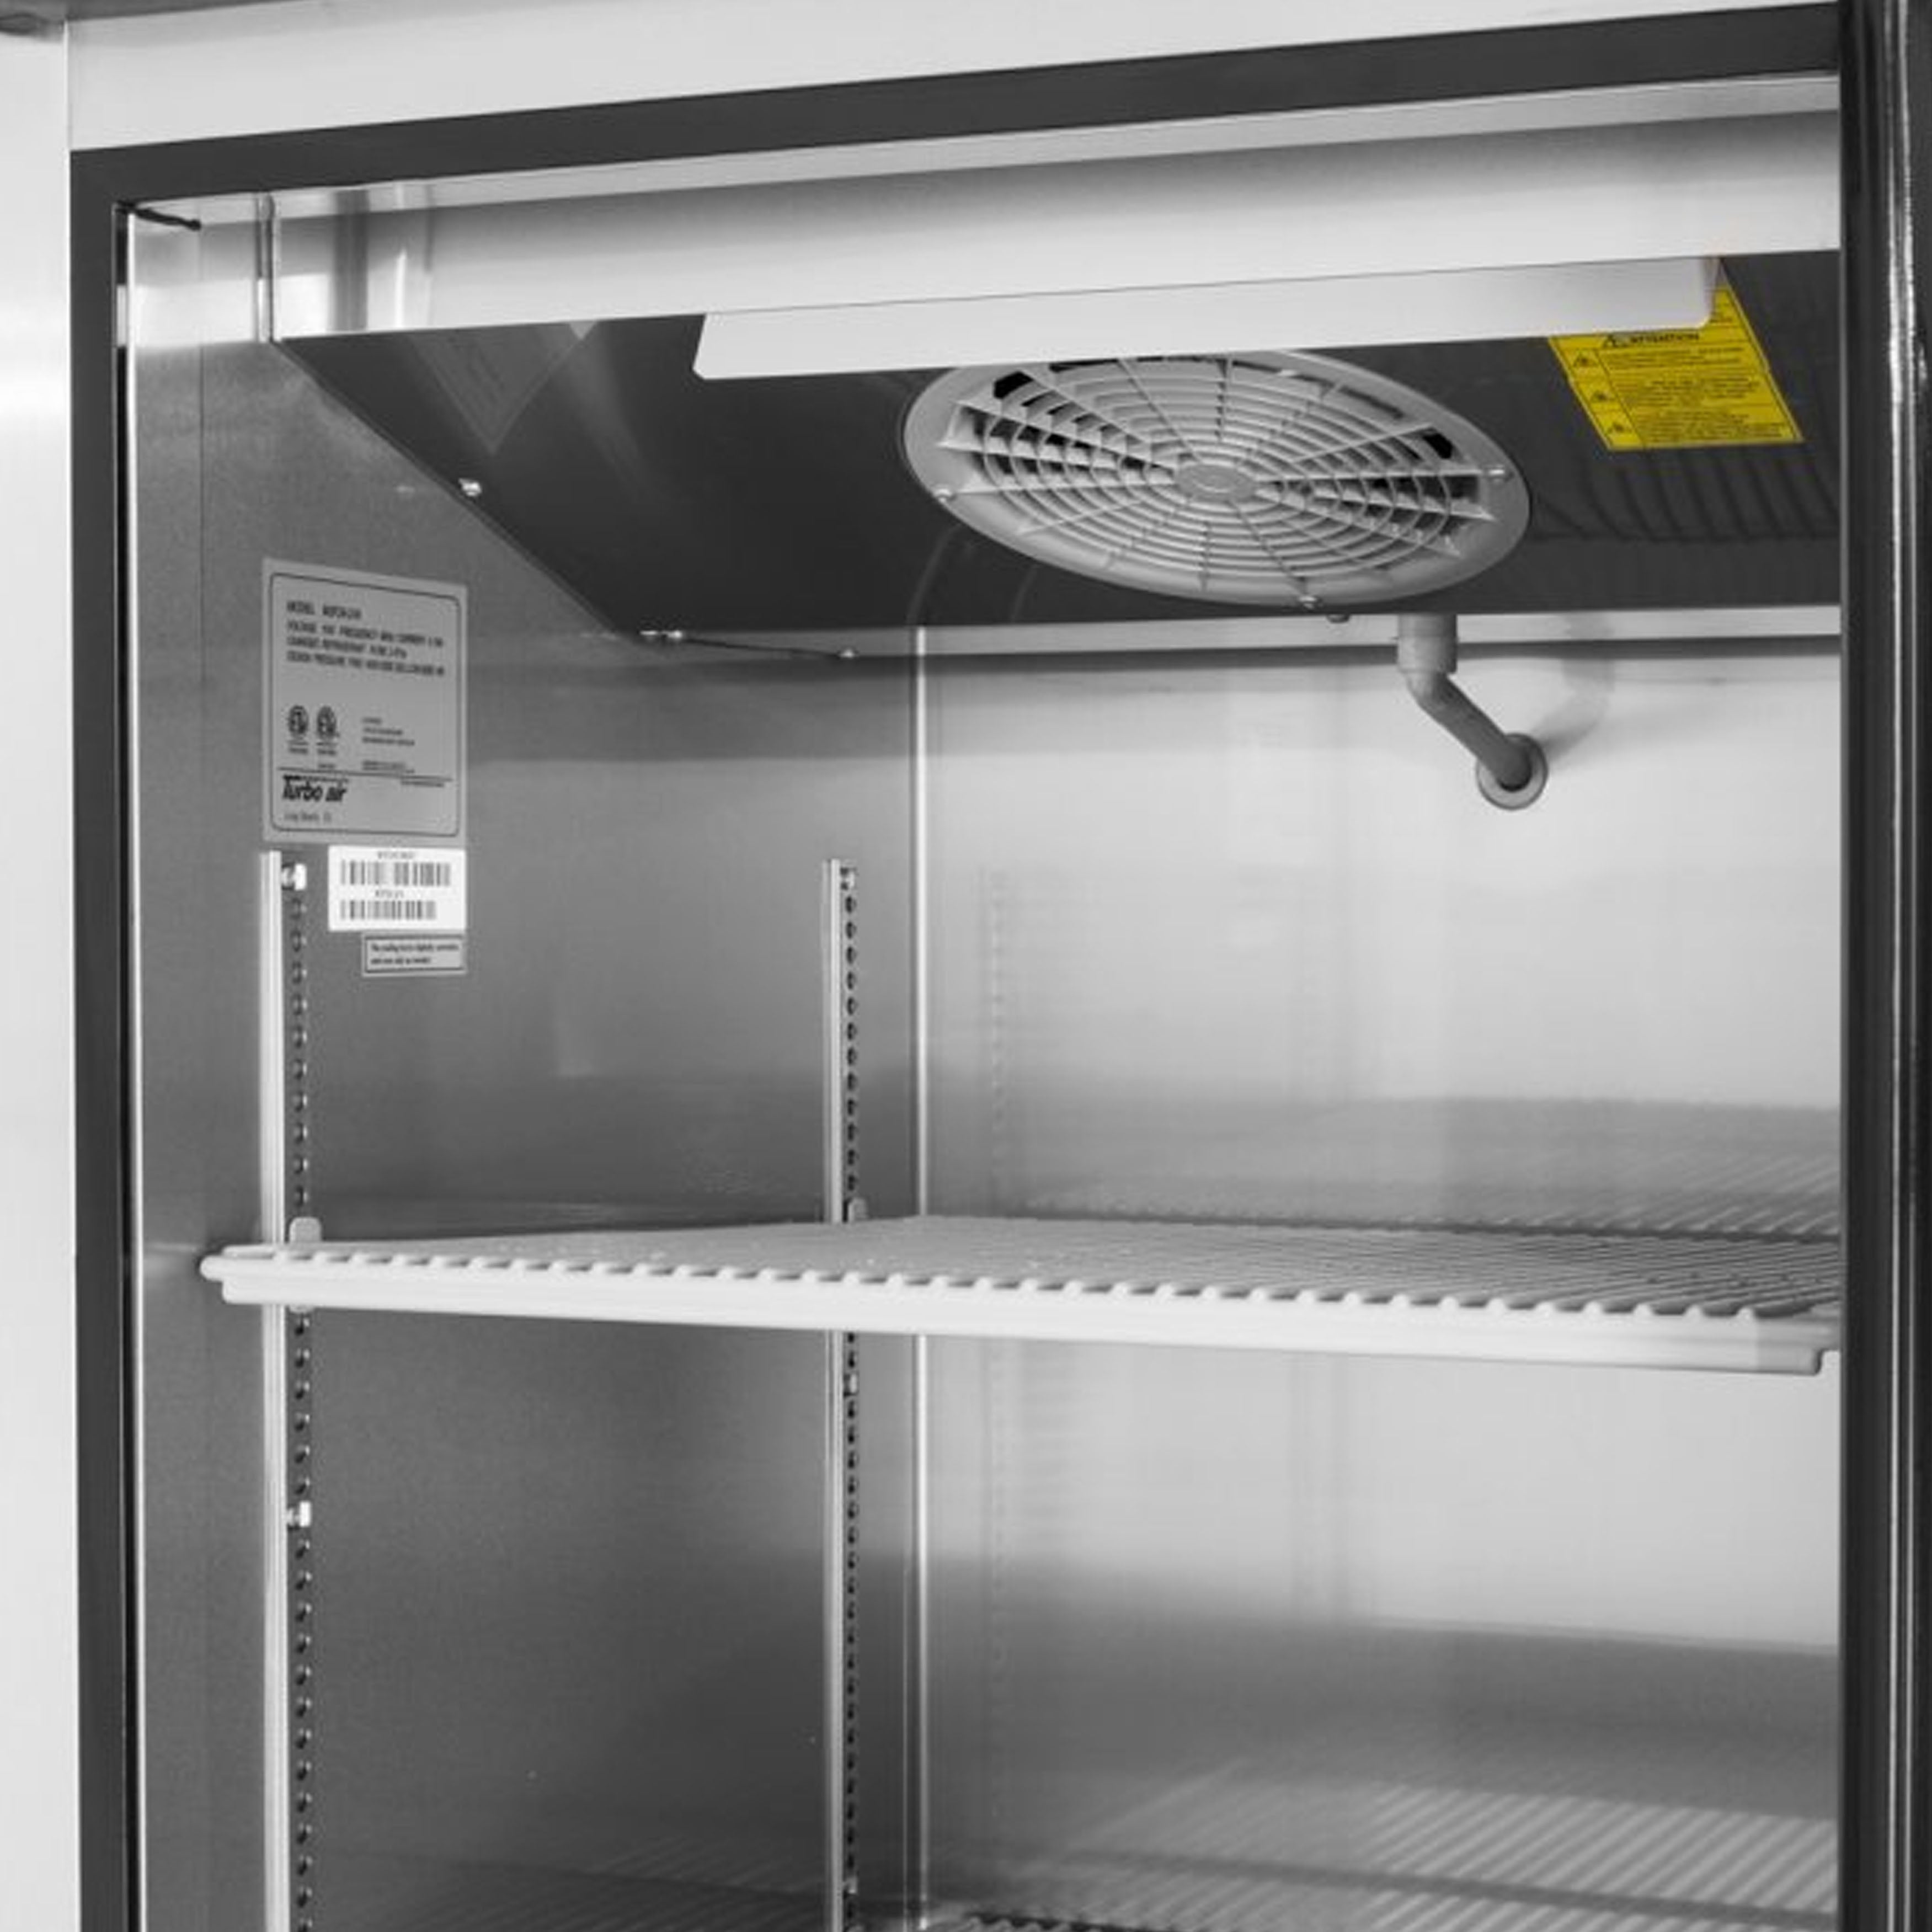 Turbo Air - M3F24-1-N, Commercial 28" Reach-in freezer M3 series Stainless Steel 21.6 cu.ft.